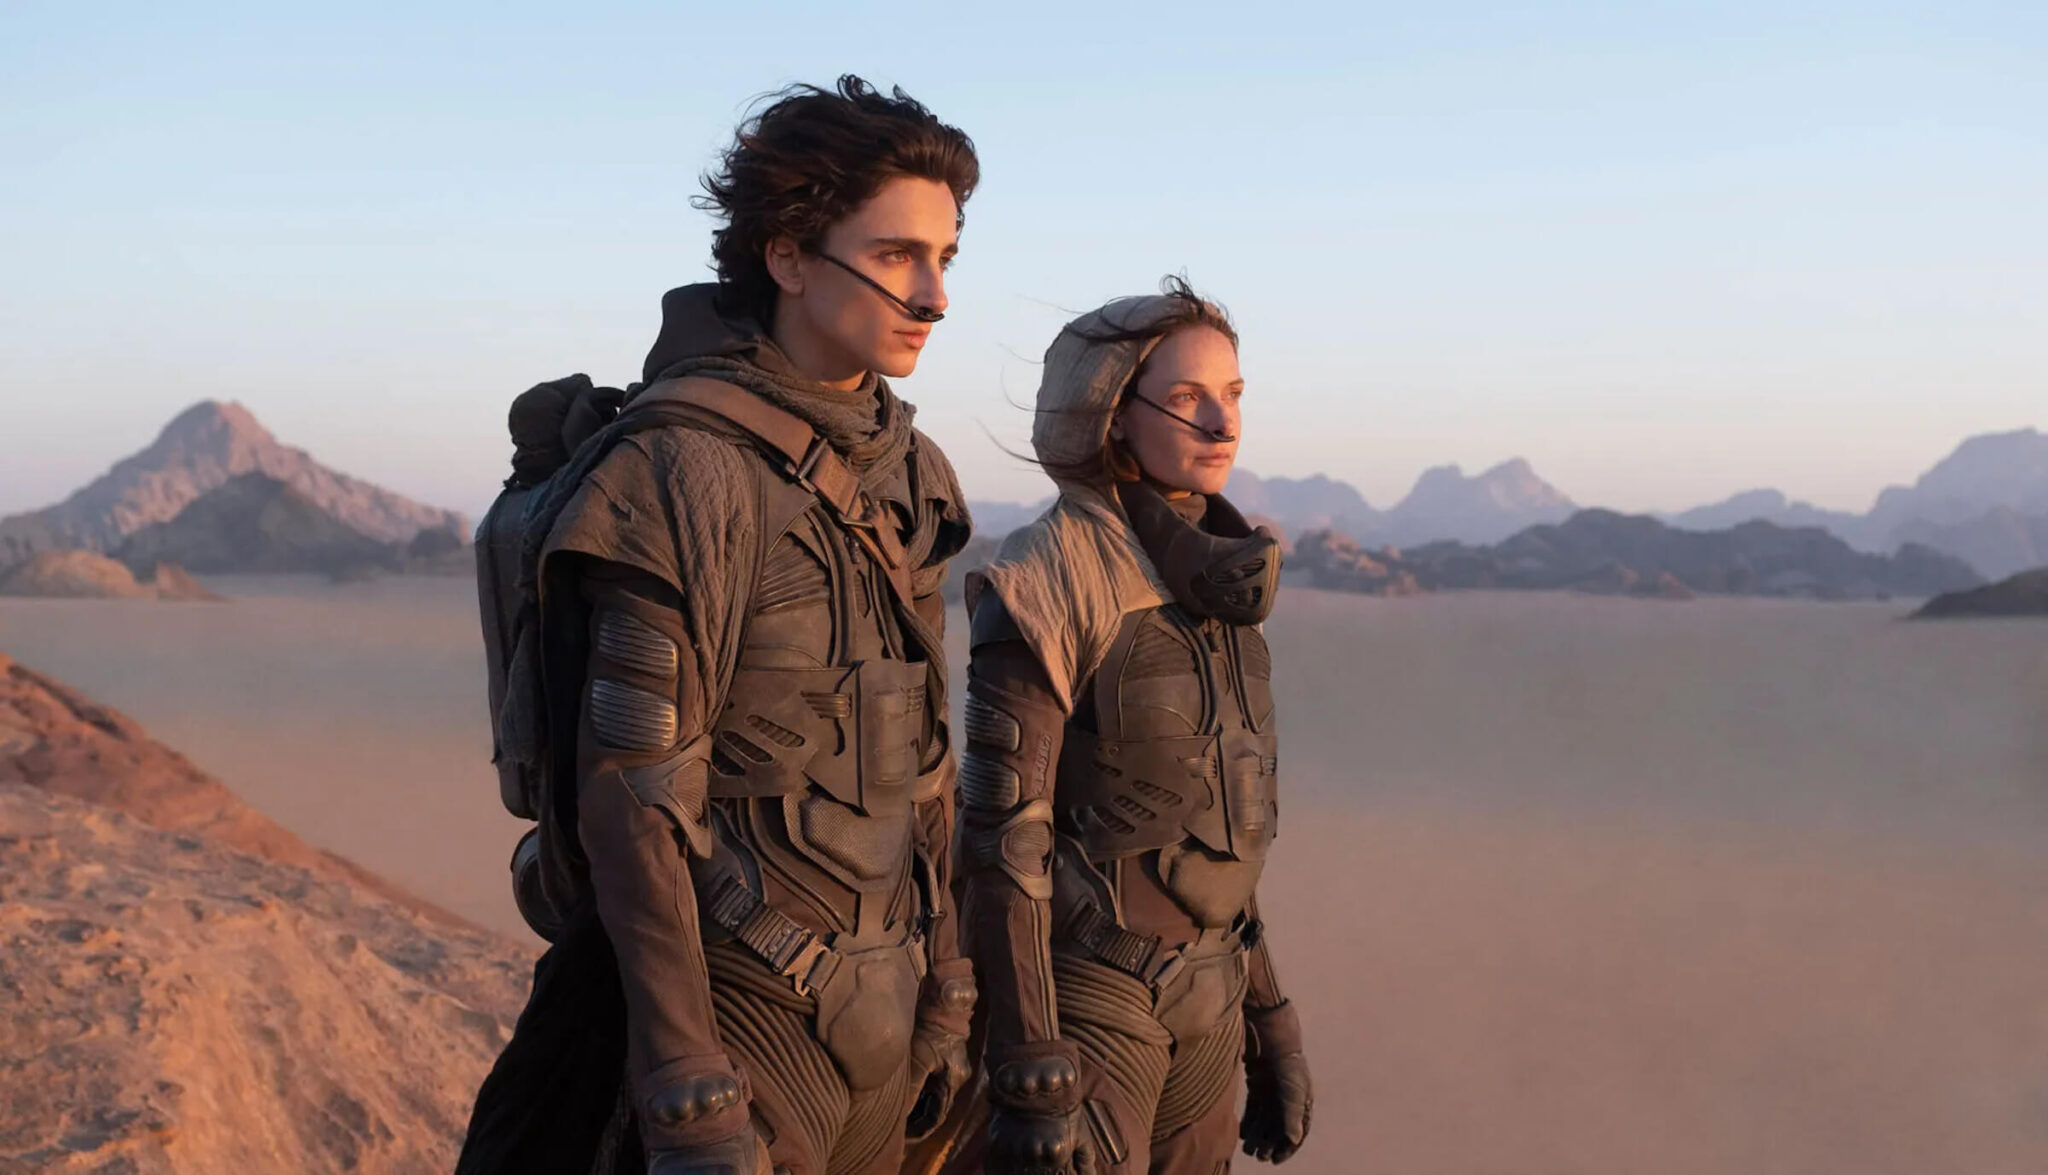 Paul (Timothée Chalamet) and Lady Jessica (Rebecca Ferguson) in sand suits standing on a dune during a sunrise in 'Dune,' 3 Lessons from 'Dune' Screenwriter Eric Roth for Conquering Any Genre (or Planet)